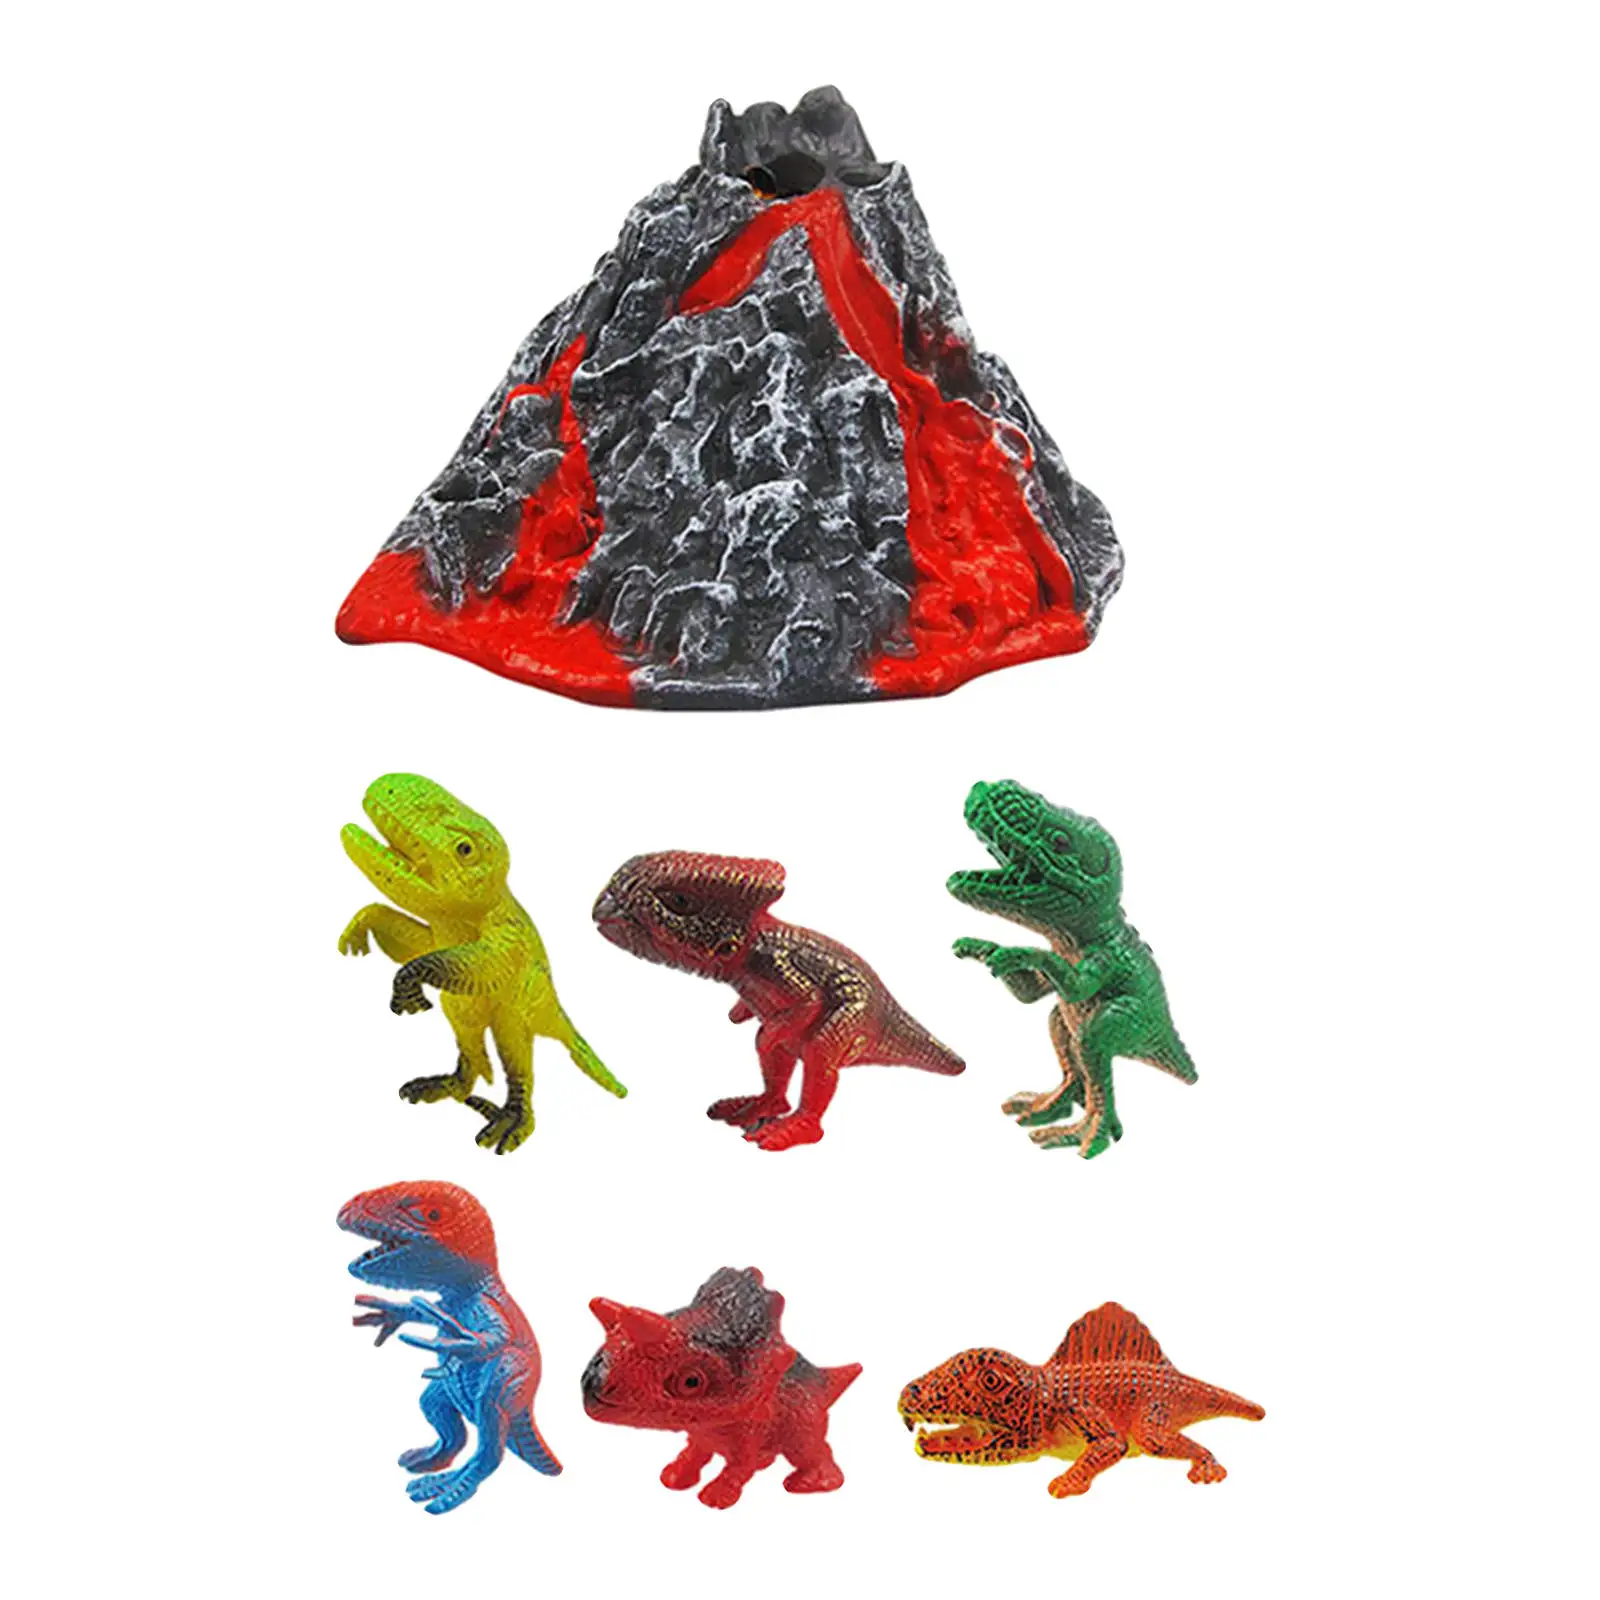 Electric Volcano Eruptions Development Learning Science Educational Toys for Children